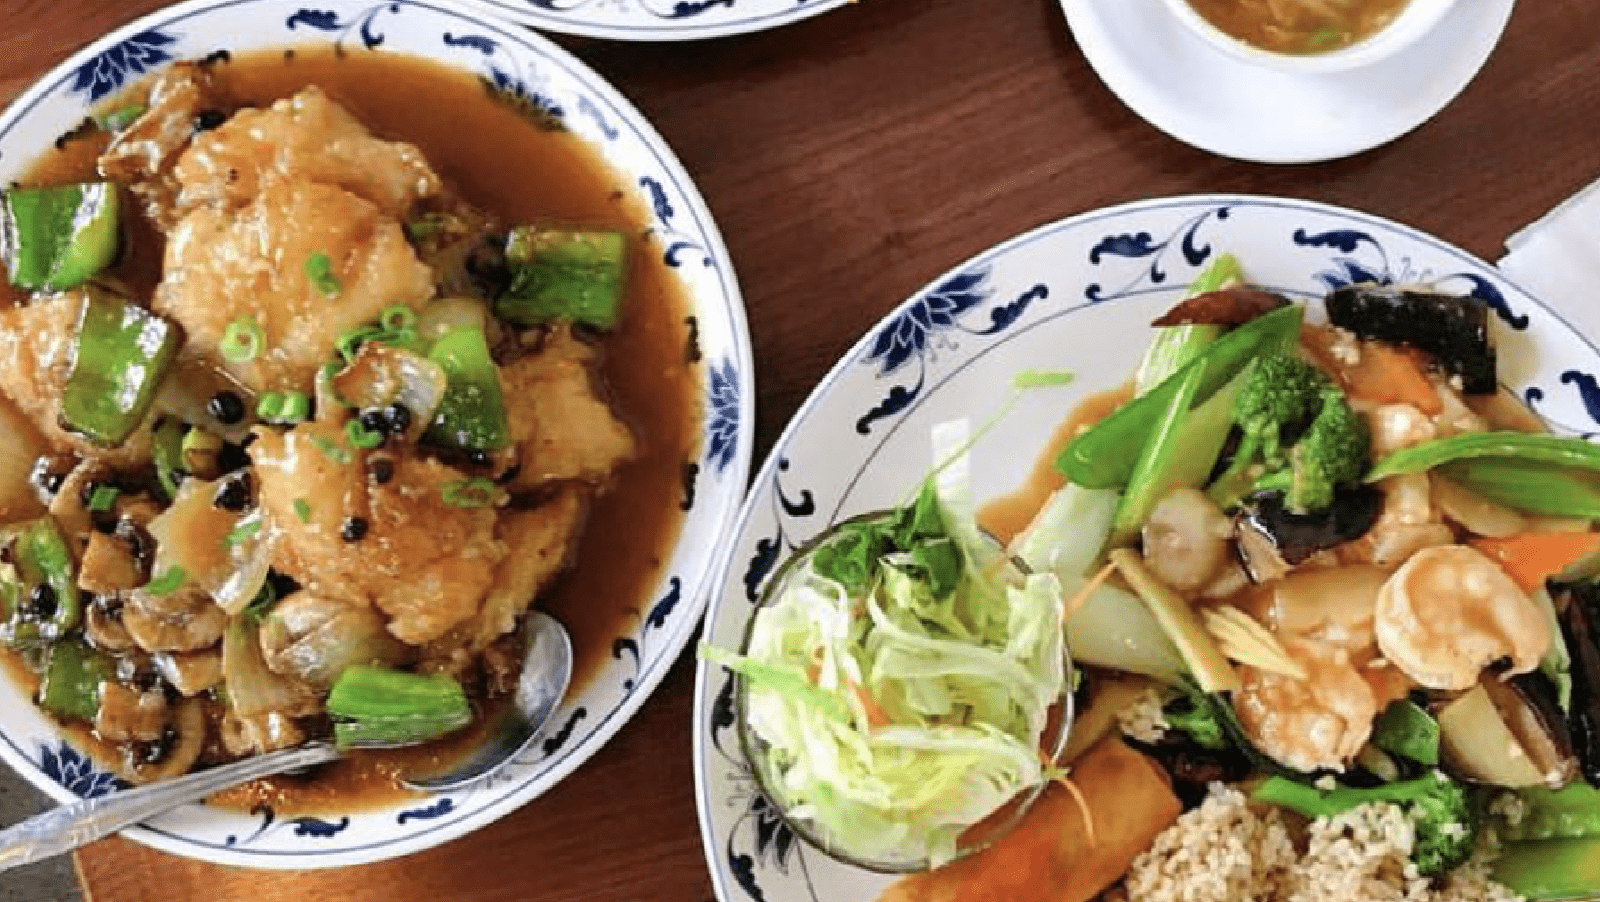 Great-China-East-Bay-Dinner-@greatchina_berkeley-800x450-1.png